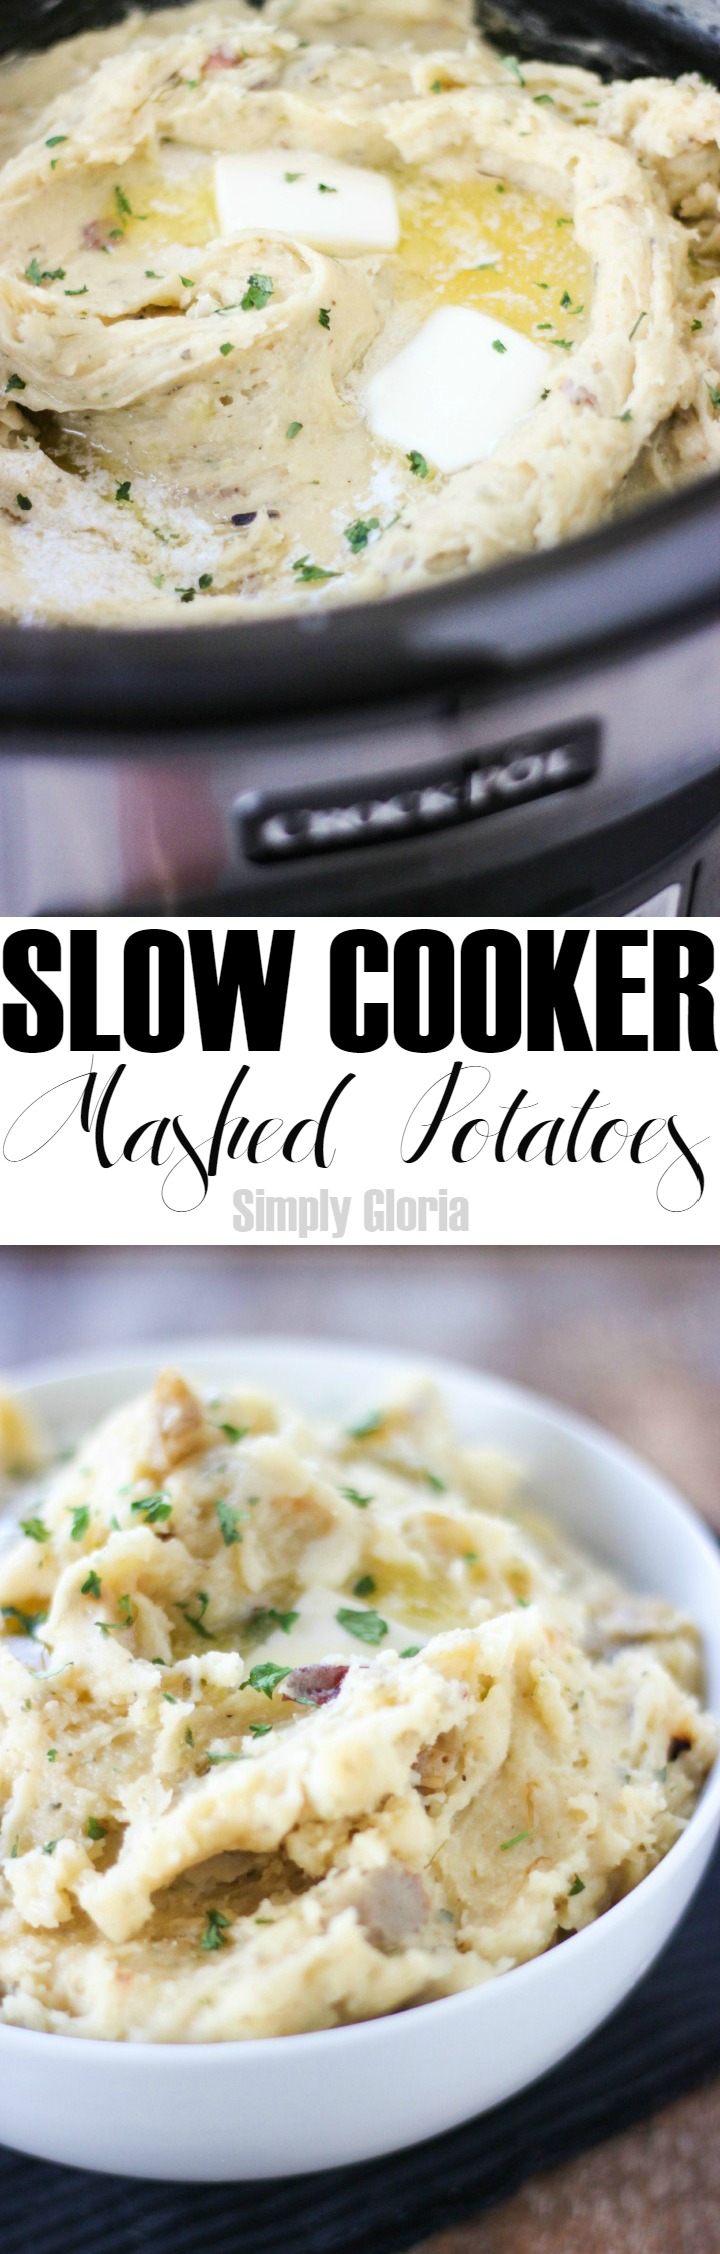 Slow Cooker Garlic Buttermilk Mashed Potatoes with SimplyGloria.com #CrockPot #Dinner